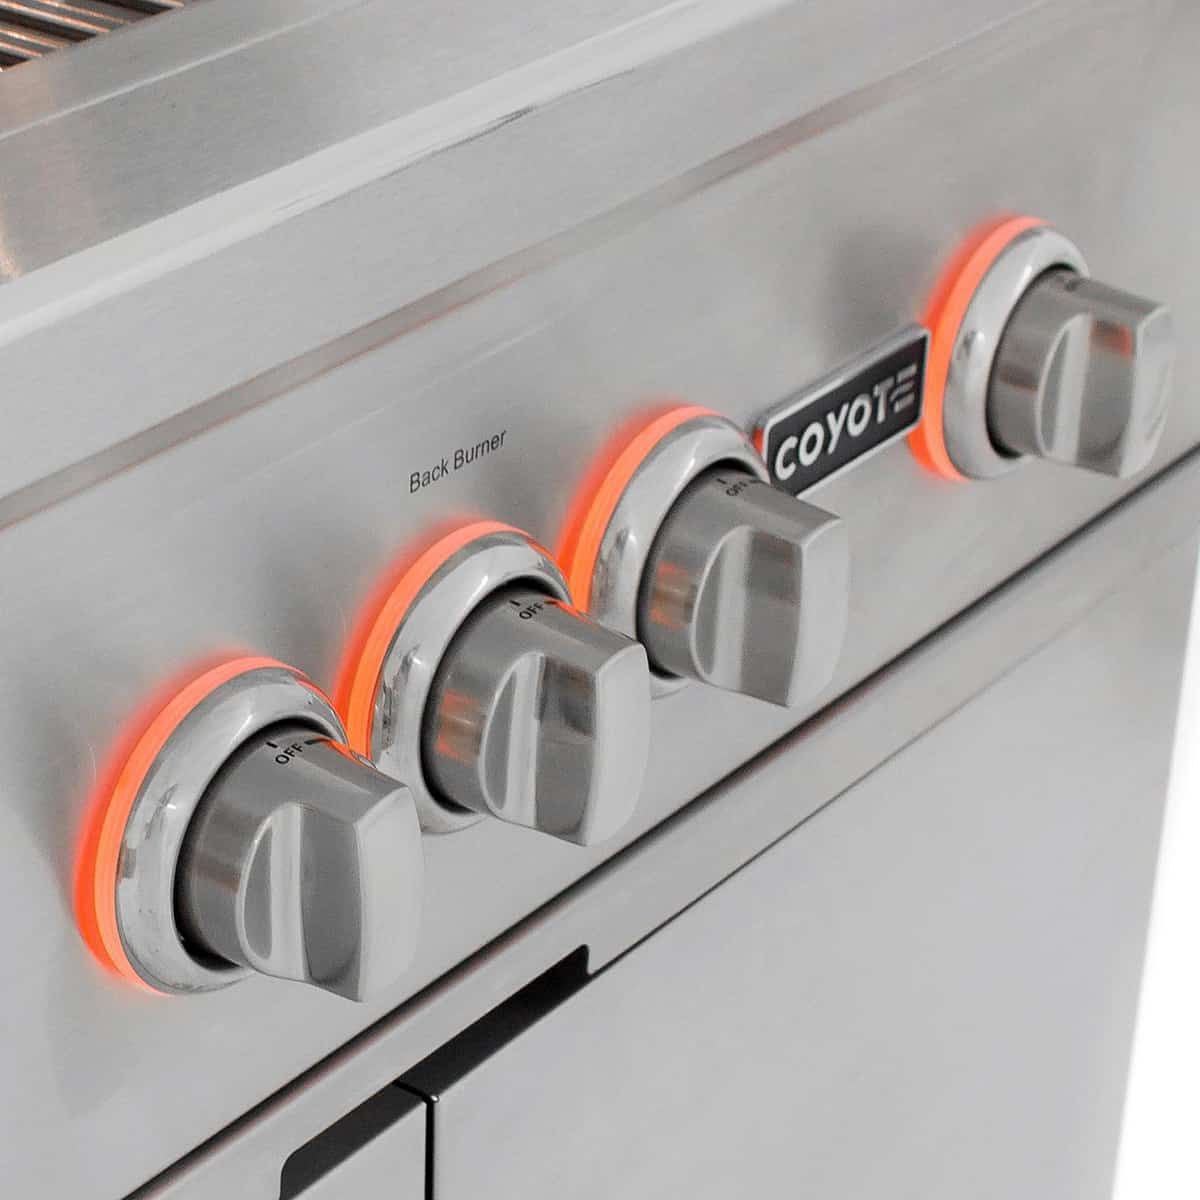 Coyote S-Series 36 Inch Built-In 4-Burner Grill with LED Lights and Rapidsear Infrared Burner Knobs Close-up